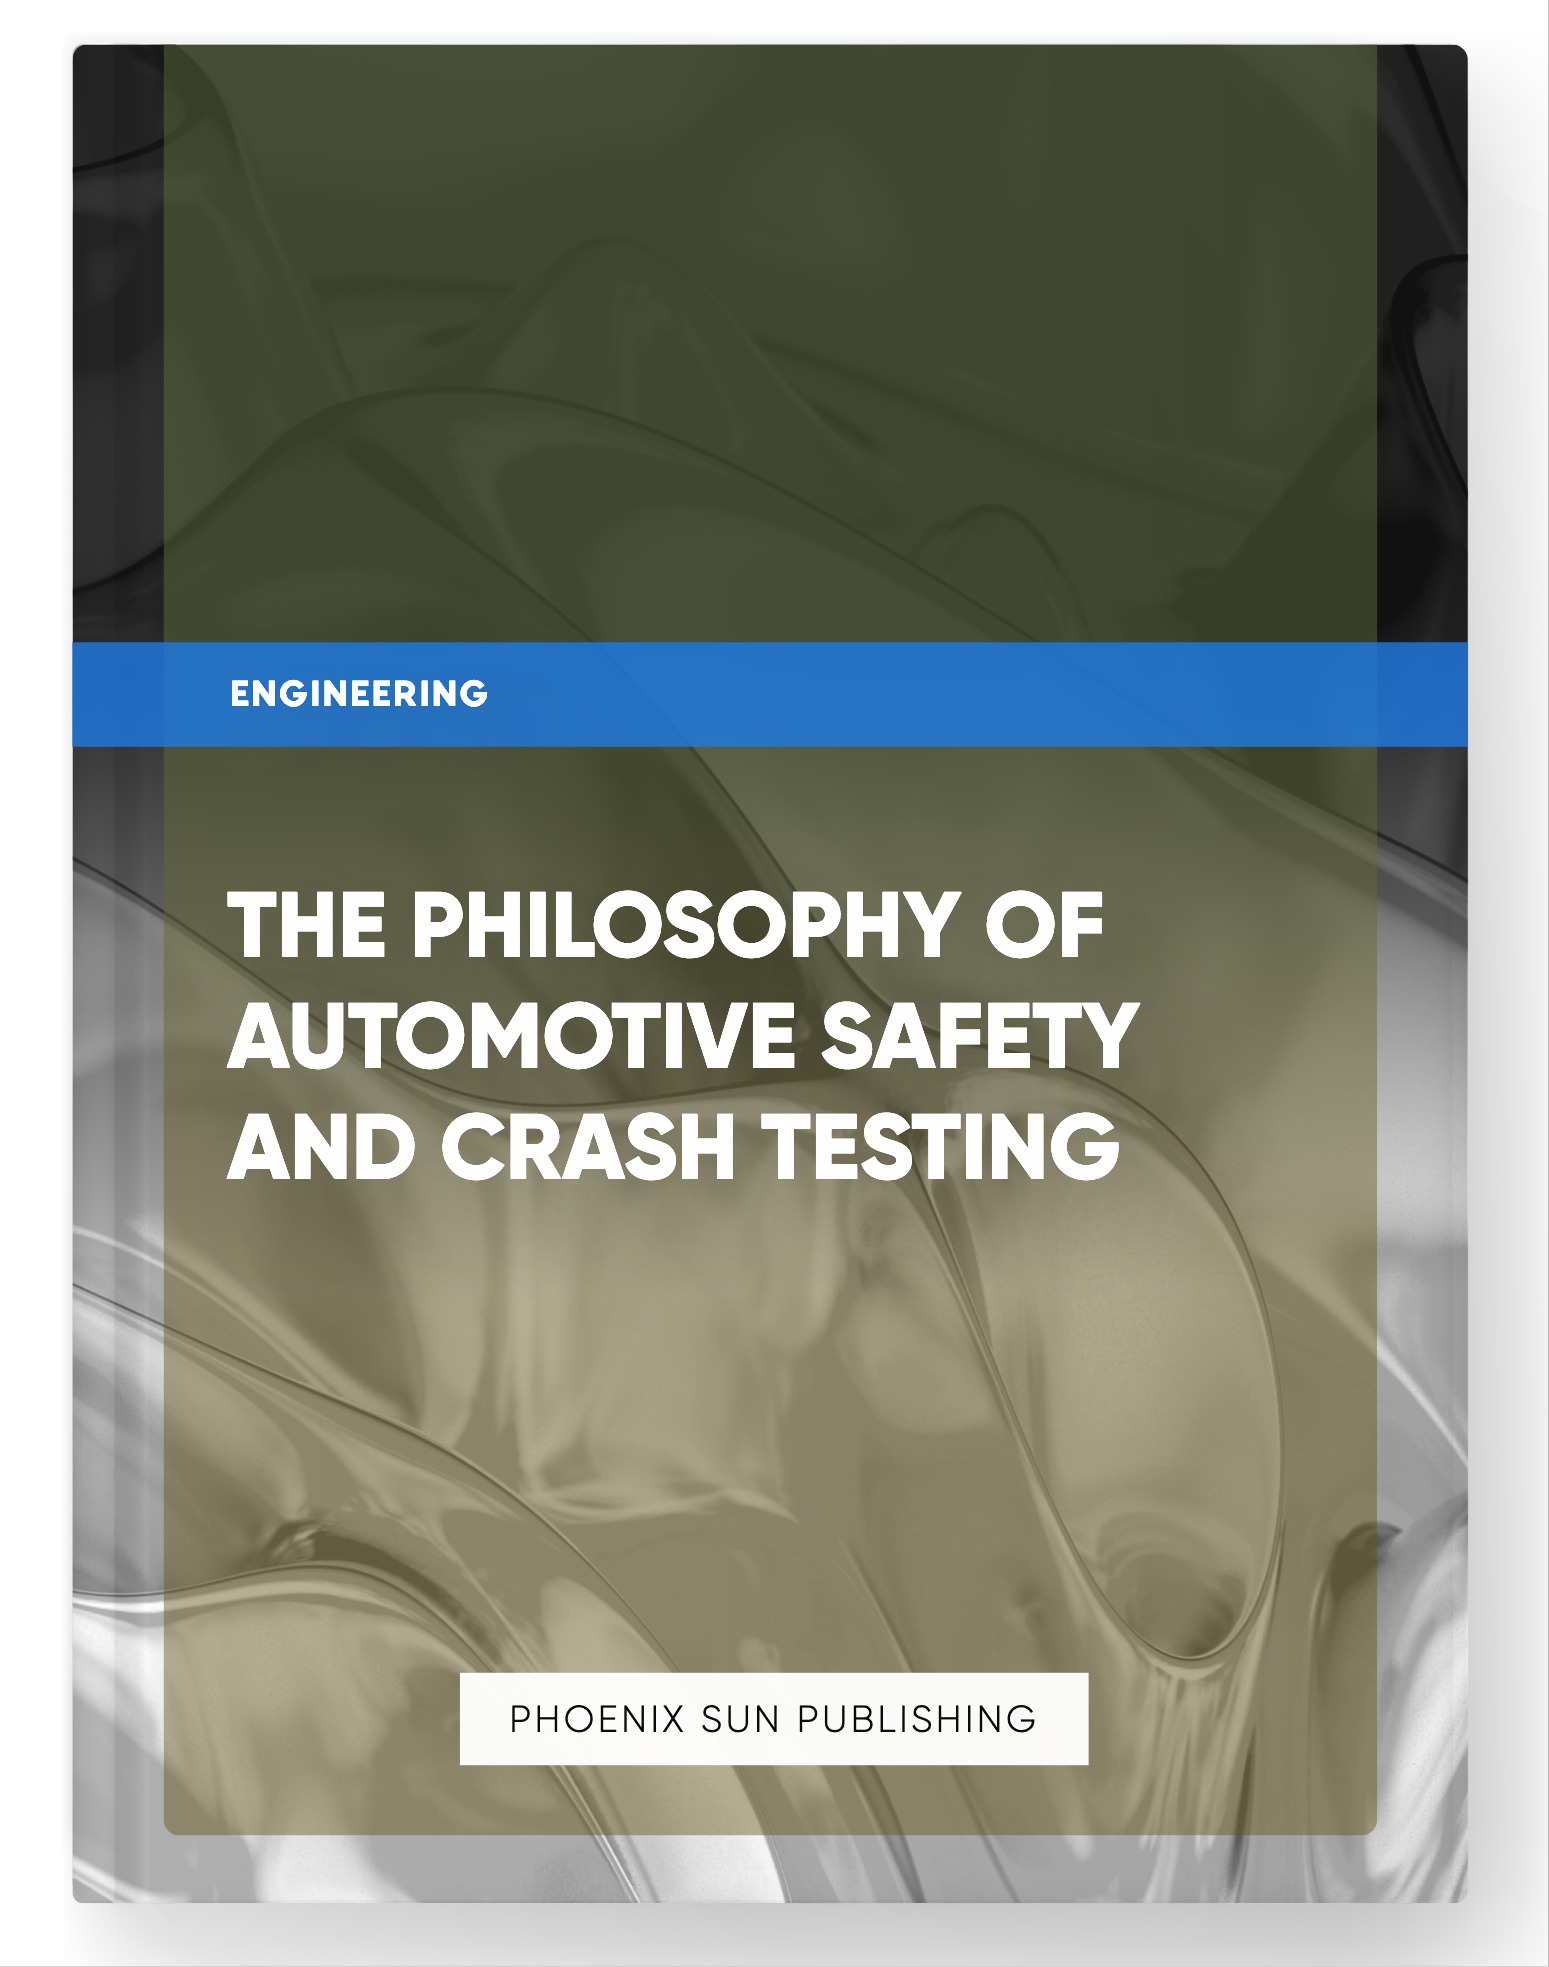 The Philosophy of Automotive Safety and Crash Testing